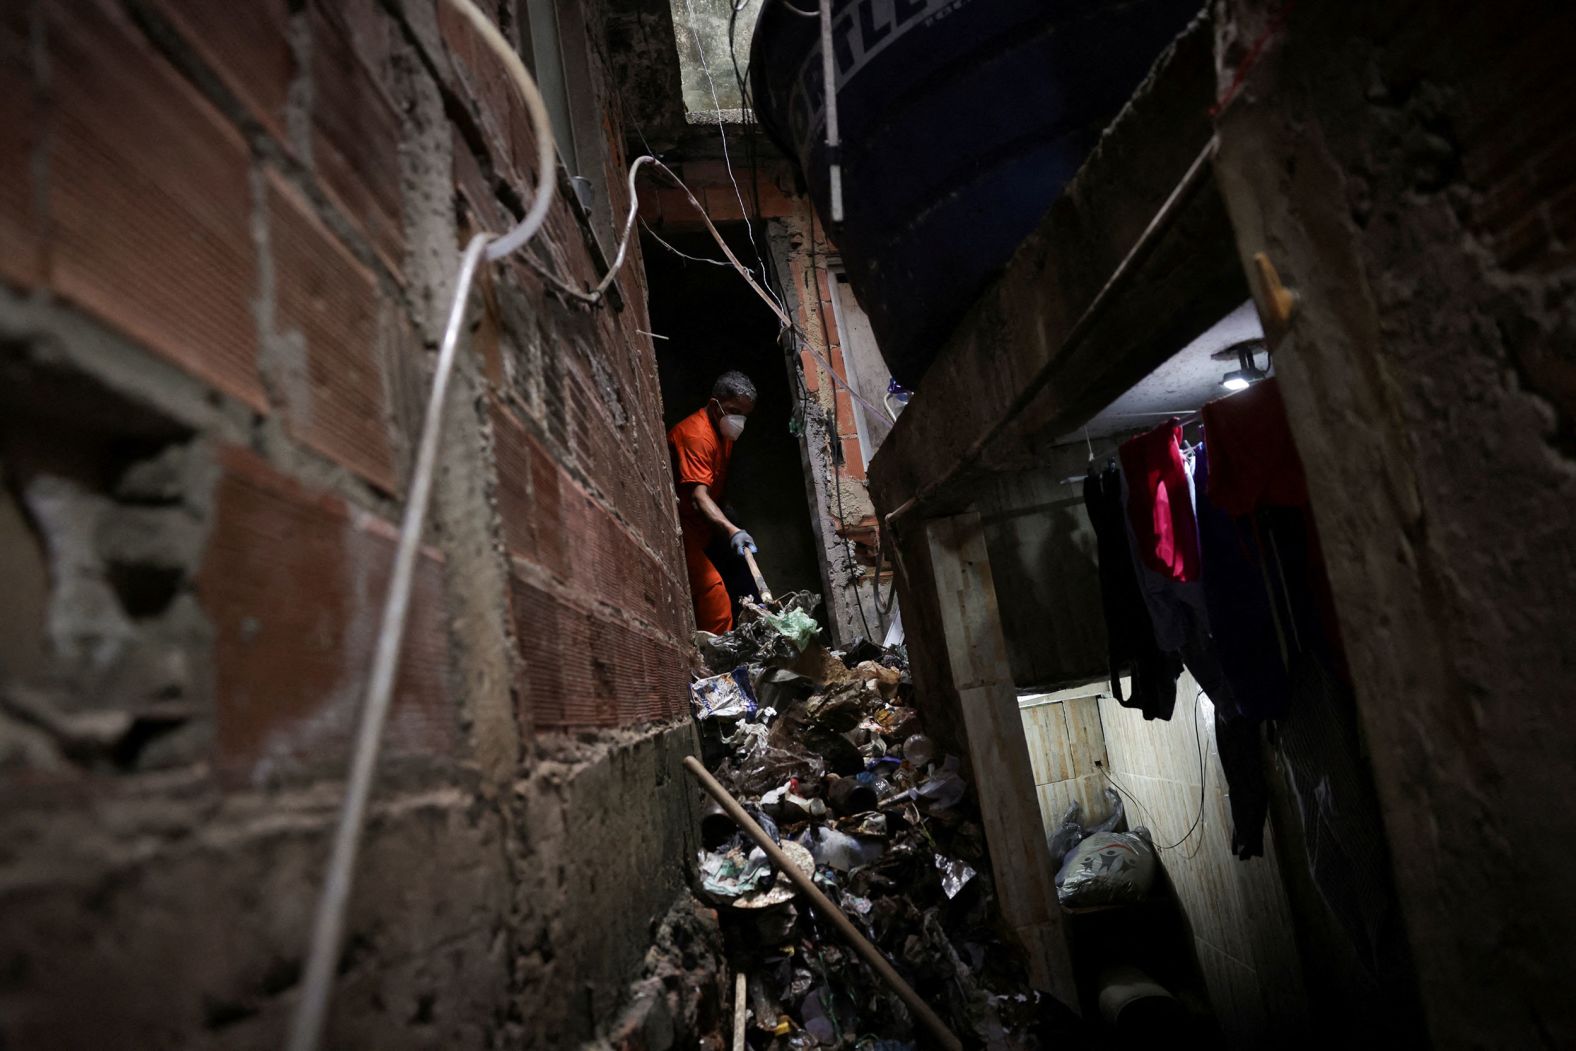 A person collects garbage from a house in the Rocinha slum of Rio de Janeiro on Wednesday, February 7. There had been complaints from residents about potential breeding sites for the Aedes aegypti mosquito, which is responsible for spreading dengue fever, Zika, chikungunya and yellow fever. Just days before Carnival celebrations are set to take place across Brazil, <a href="index.php?page=&url=https%3A%2F%2Fwww.cnn.com%2F2024%2F02%2F07%2Famericas%2Frio-dengue-emergency-carnival-intl%2Findex.html">Rio declared a state of public health emergency</a> due to an epidemic of dengue fever.